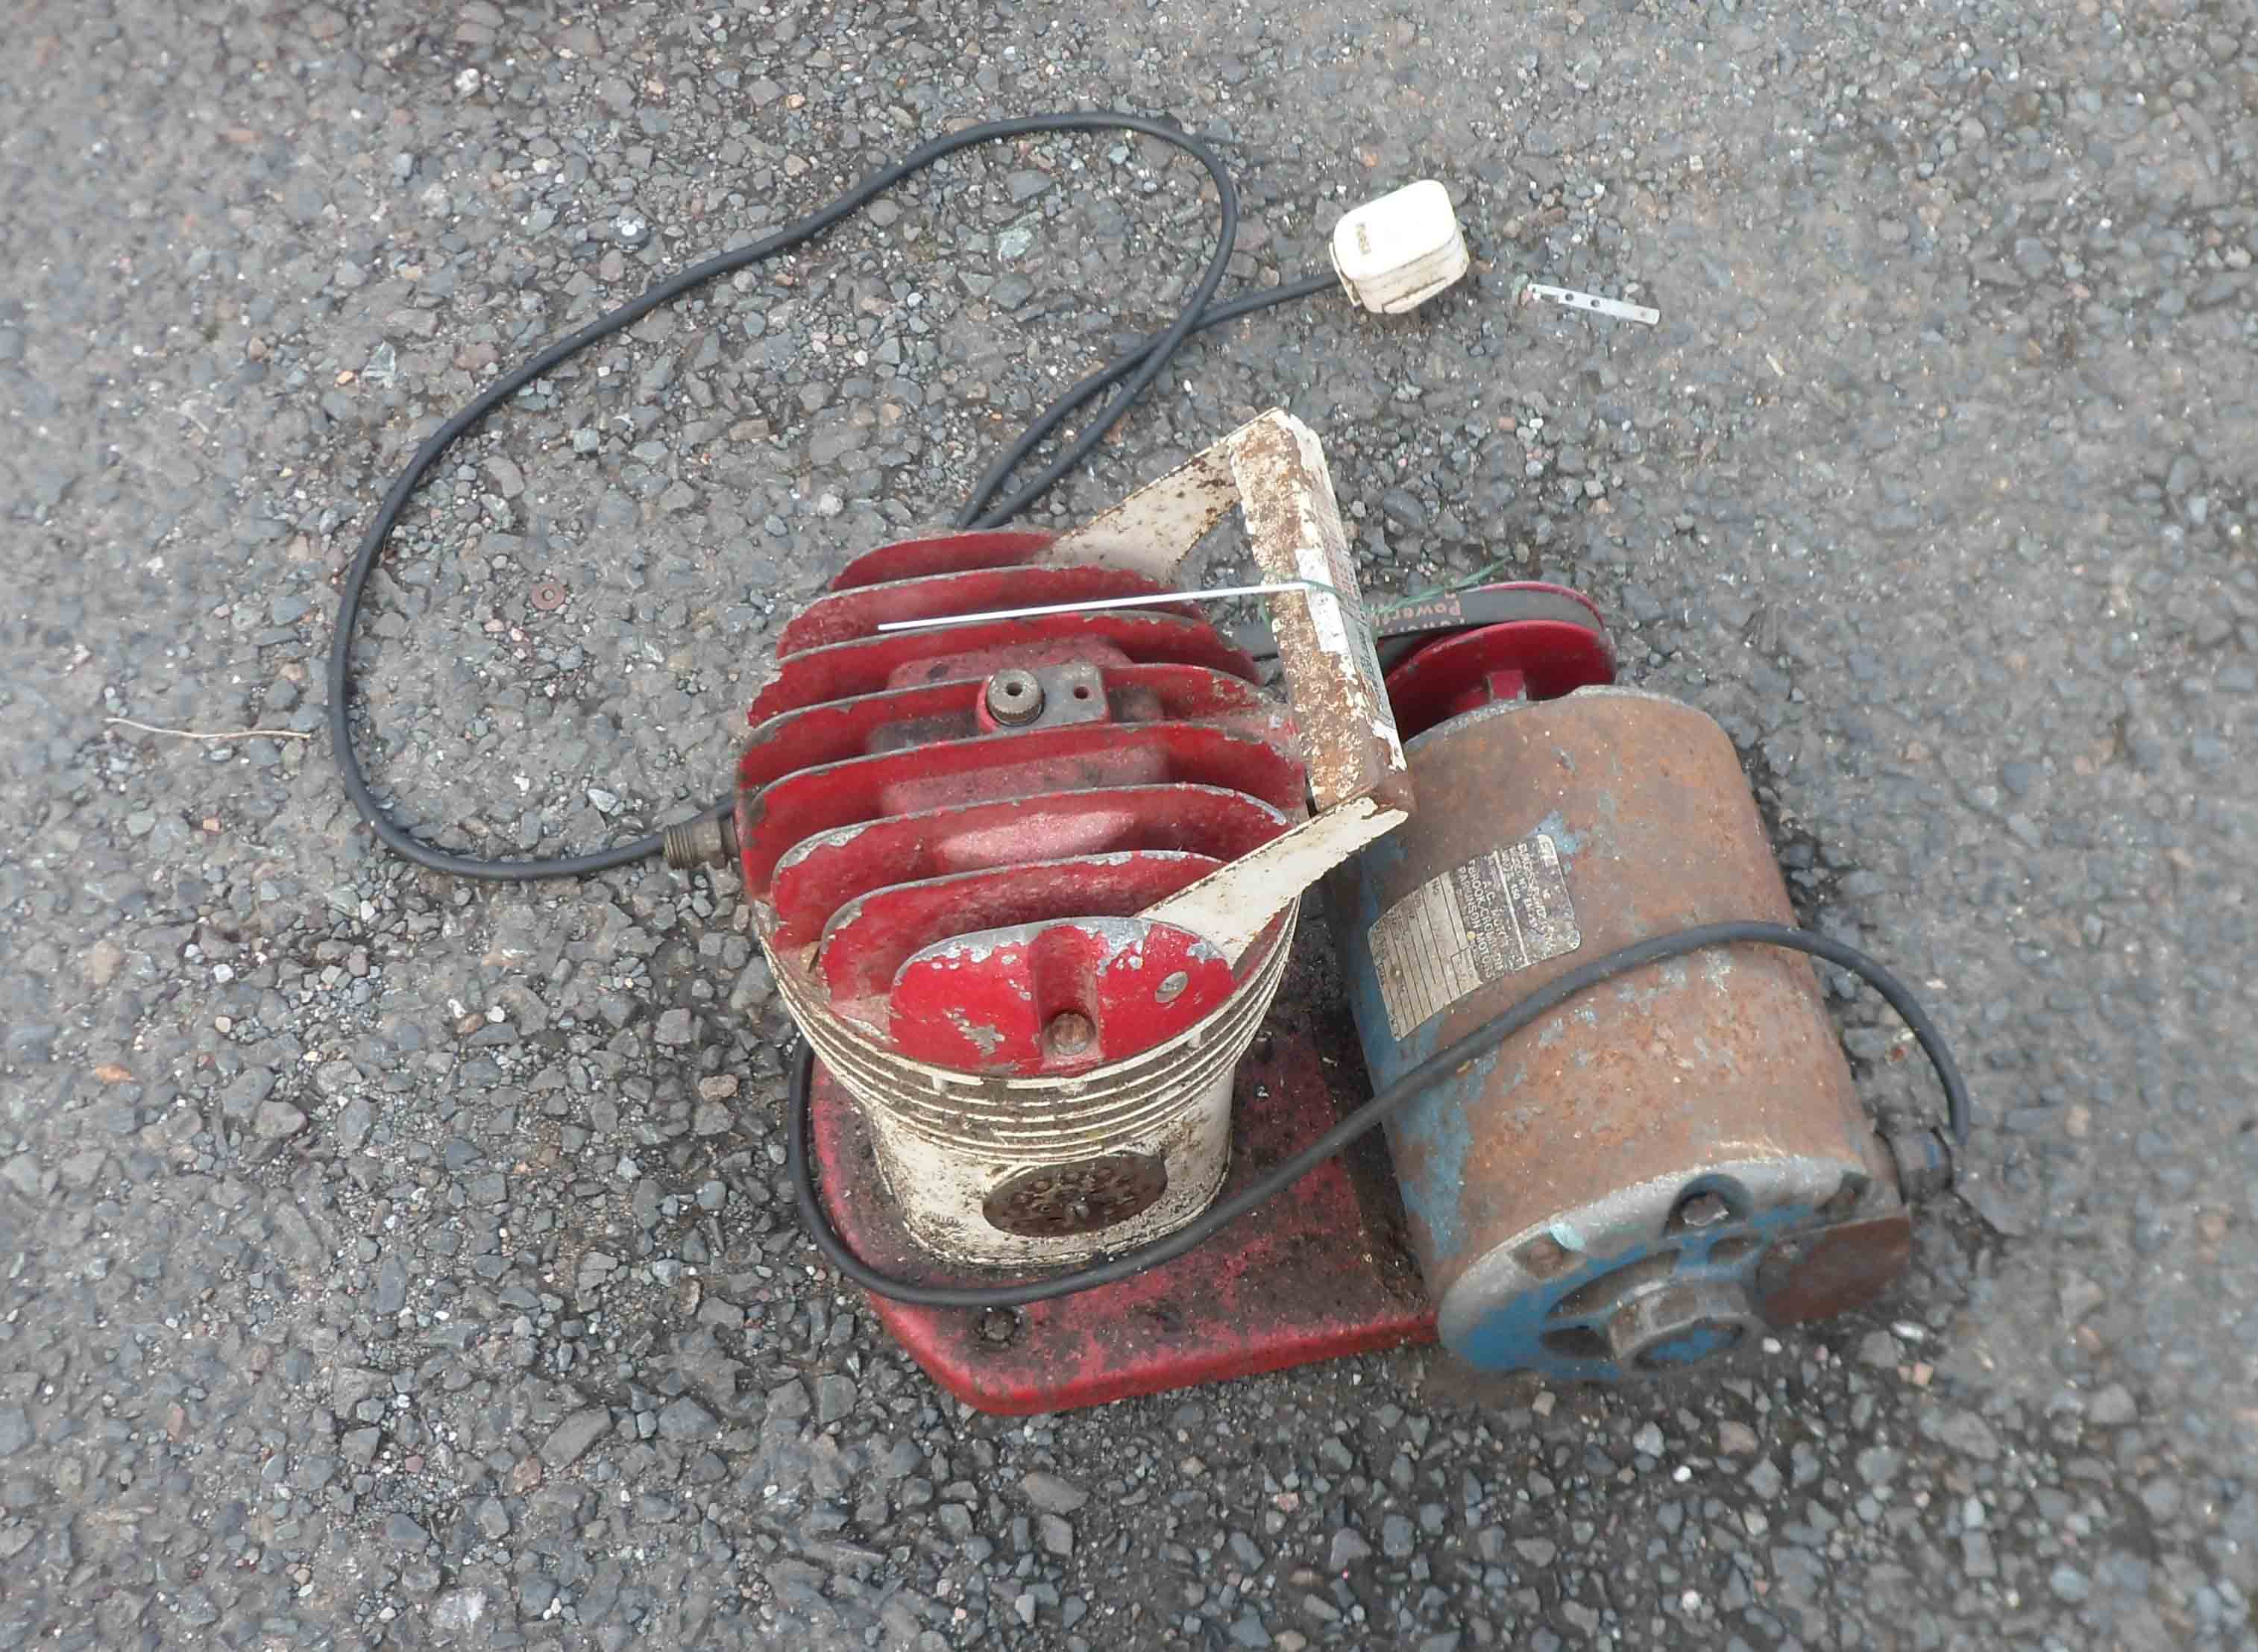 An old electric compressor